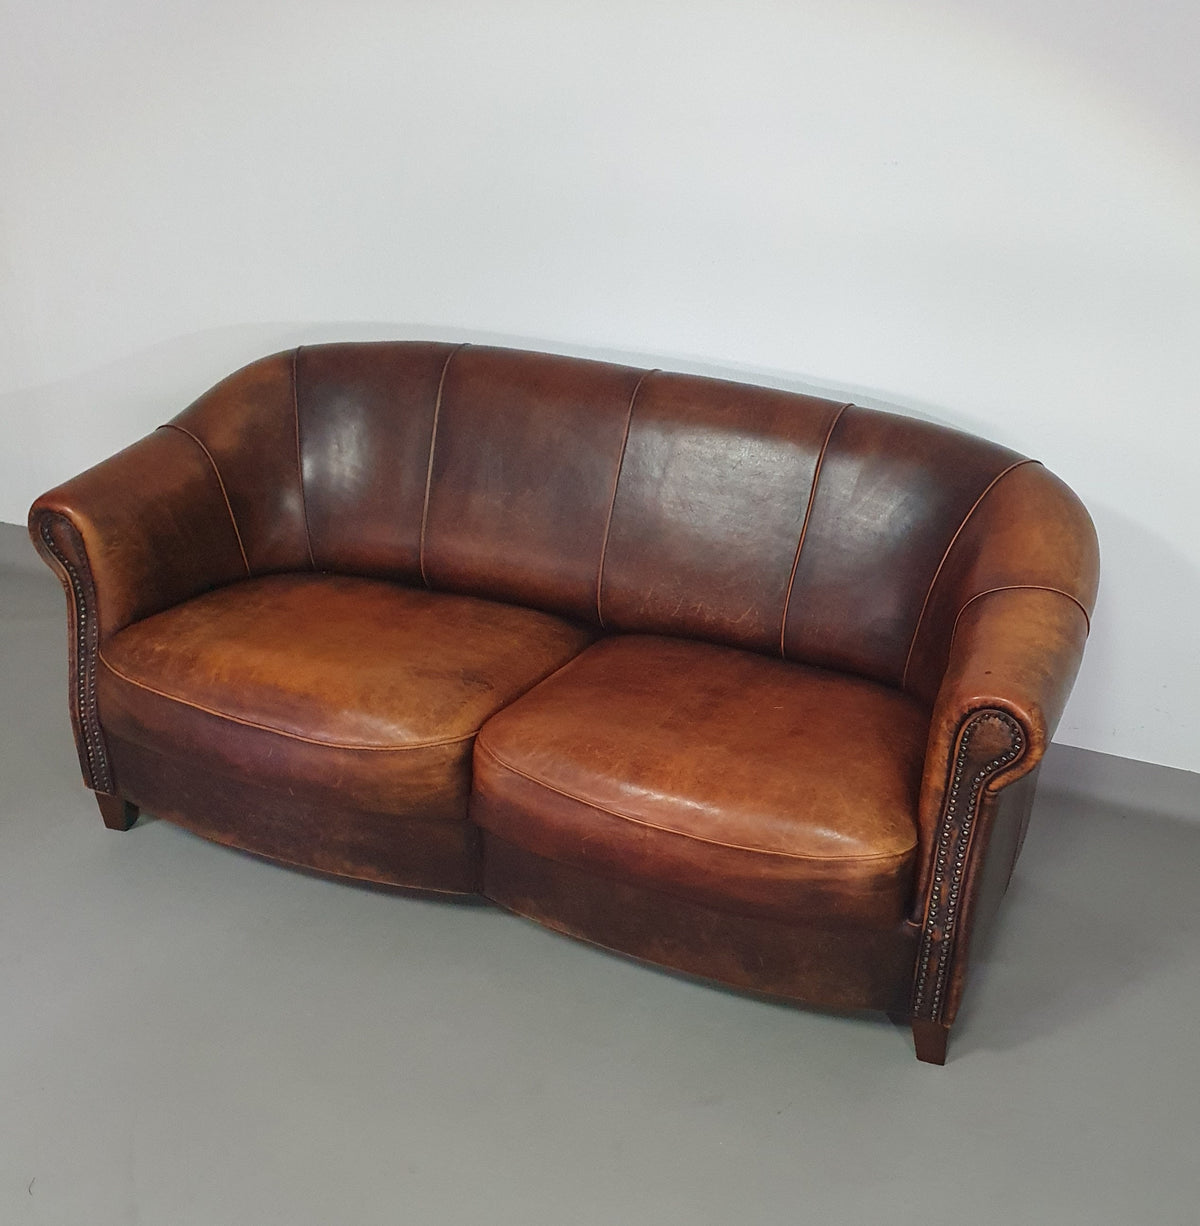 Beautiful subtly designed sheep leather club chair / sofa from the Joris brand.